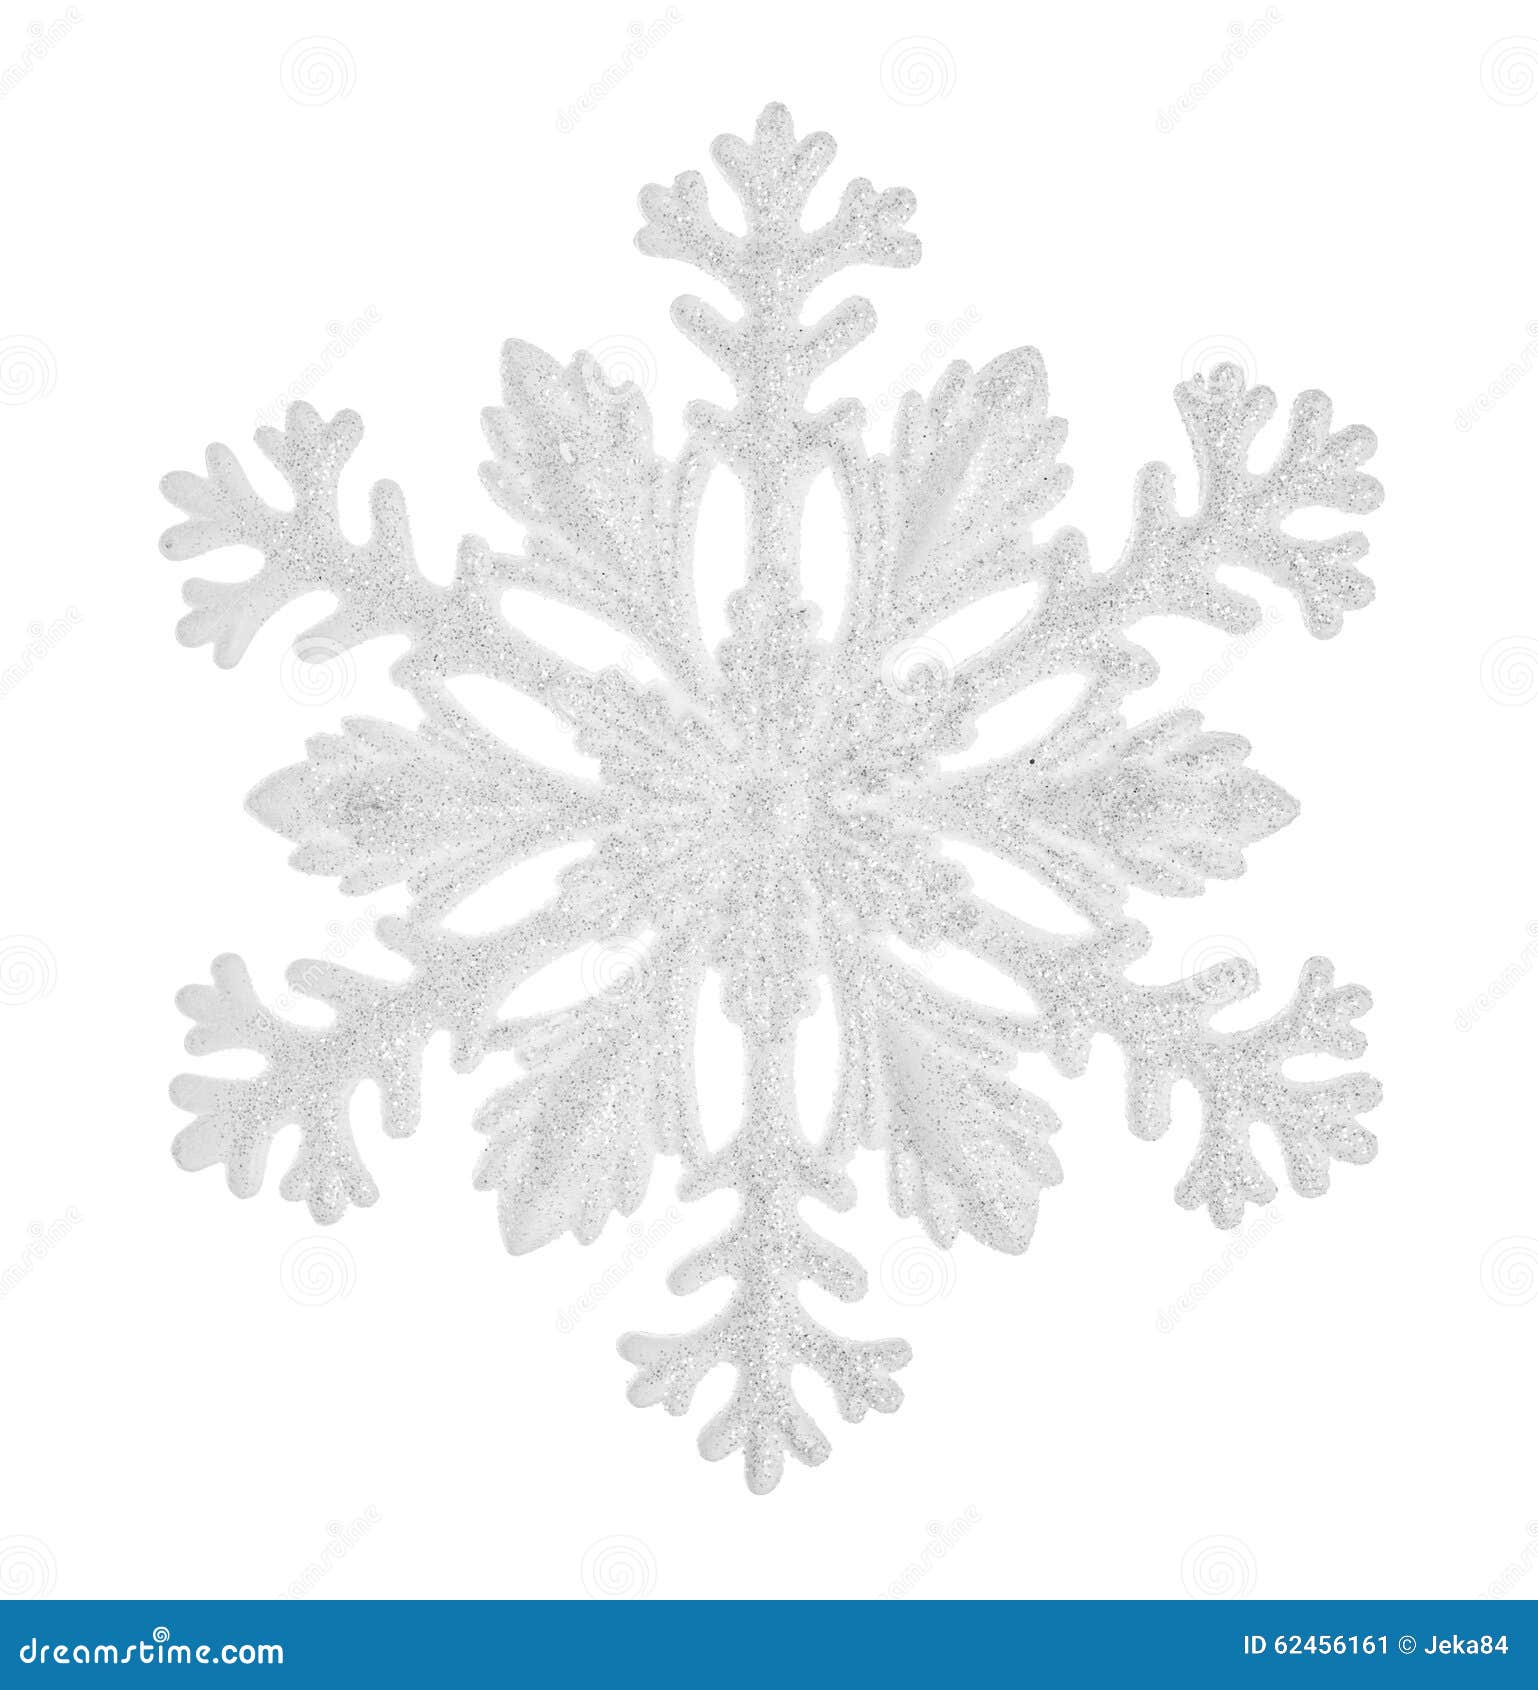 snowflake clipart without background - photo #14